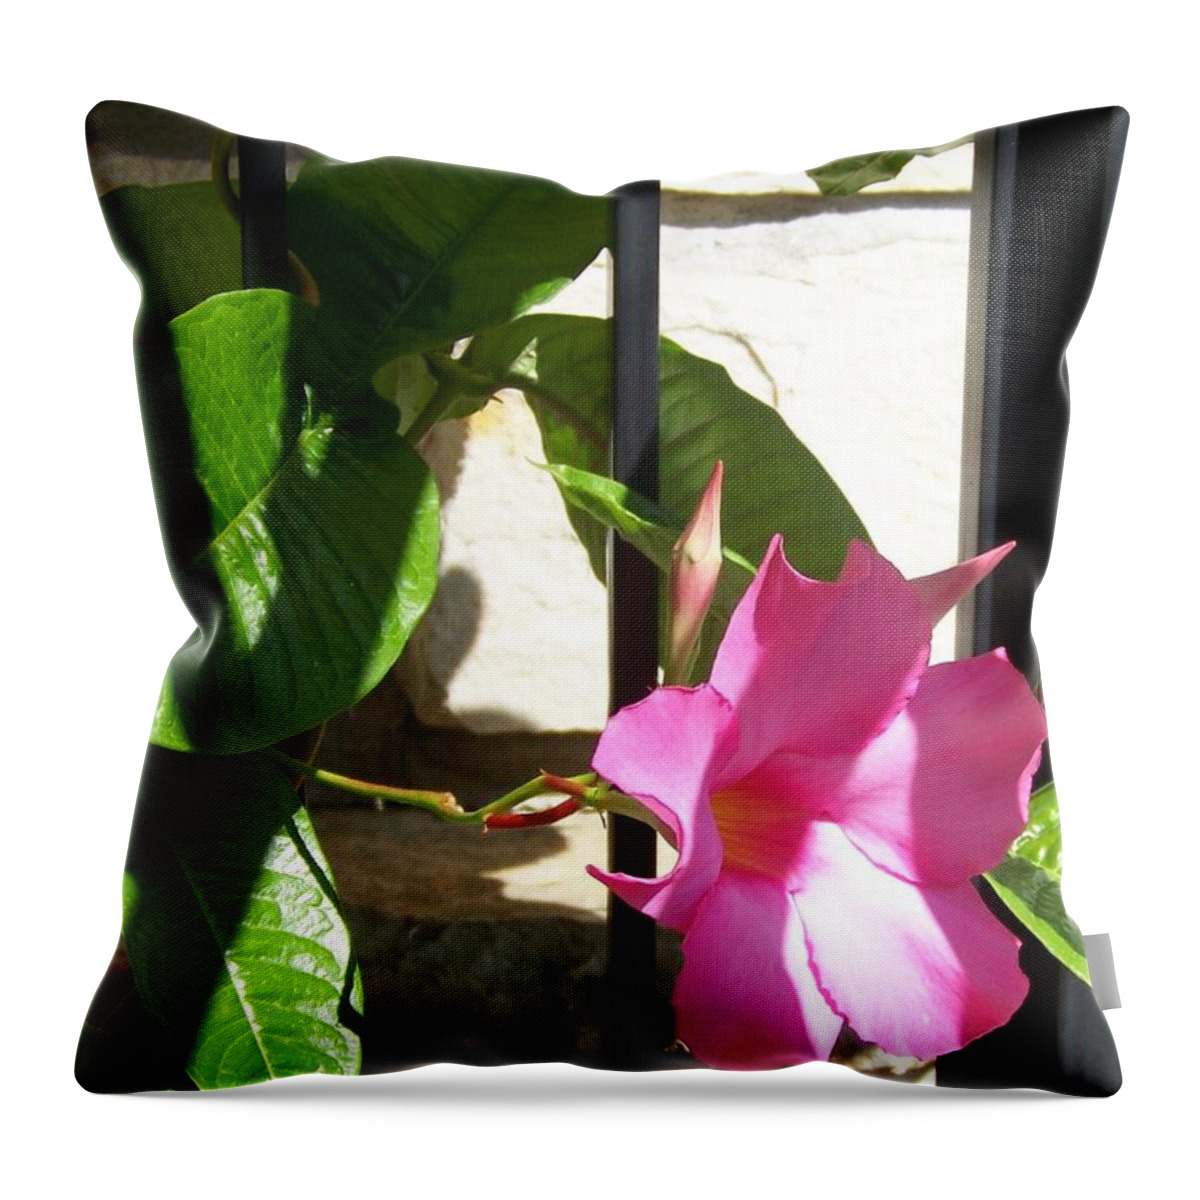 Blossom Throw Pillow featuring the photograph Summer Blossom by Jackie Mueller-Jones